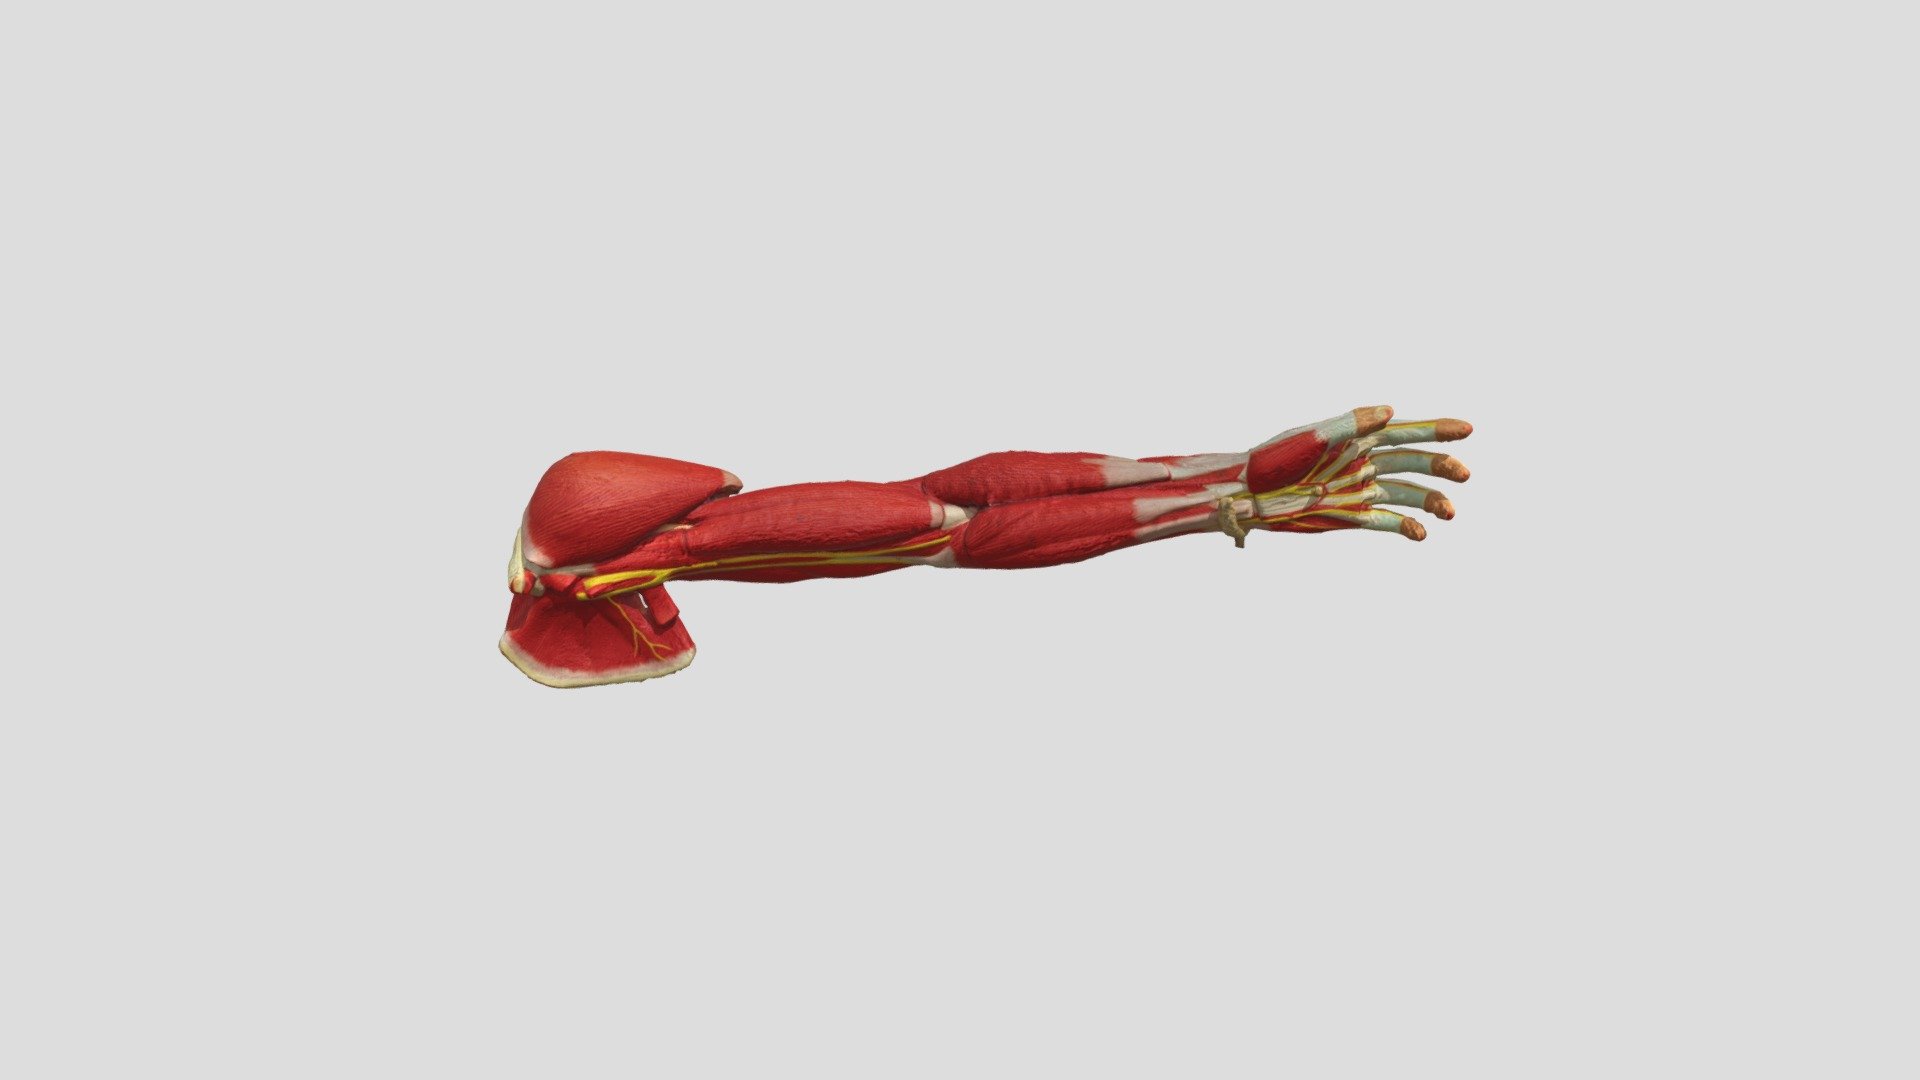 The Arm at LW Tech - 3D model by ogbog [99a380d] - Sketchfab